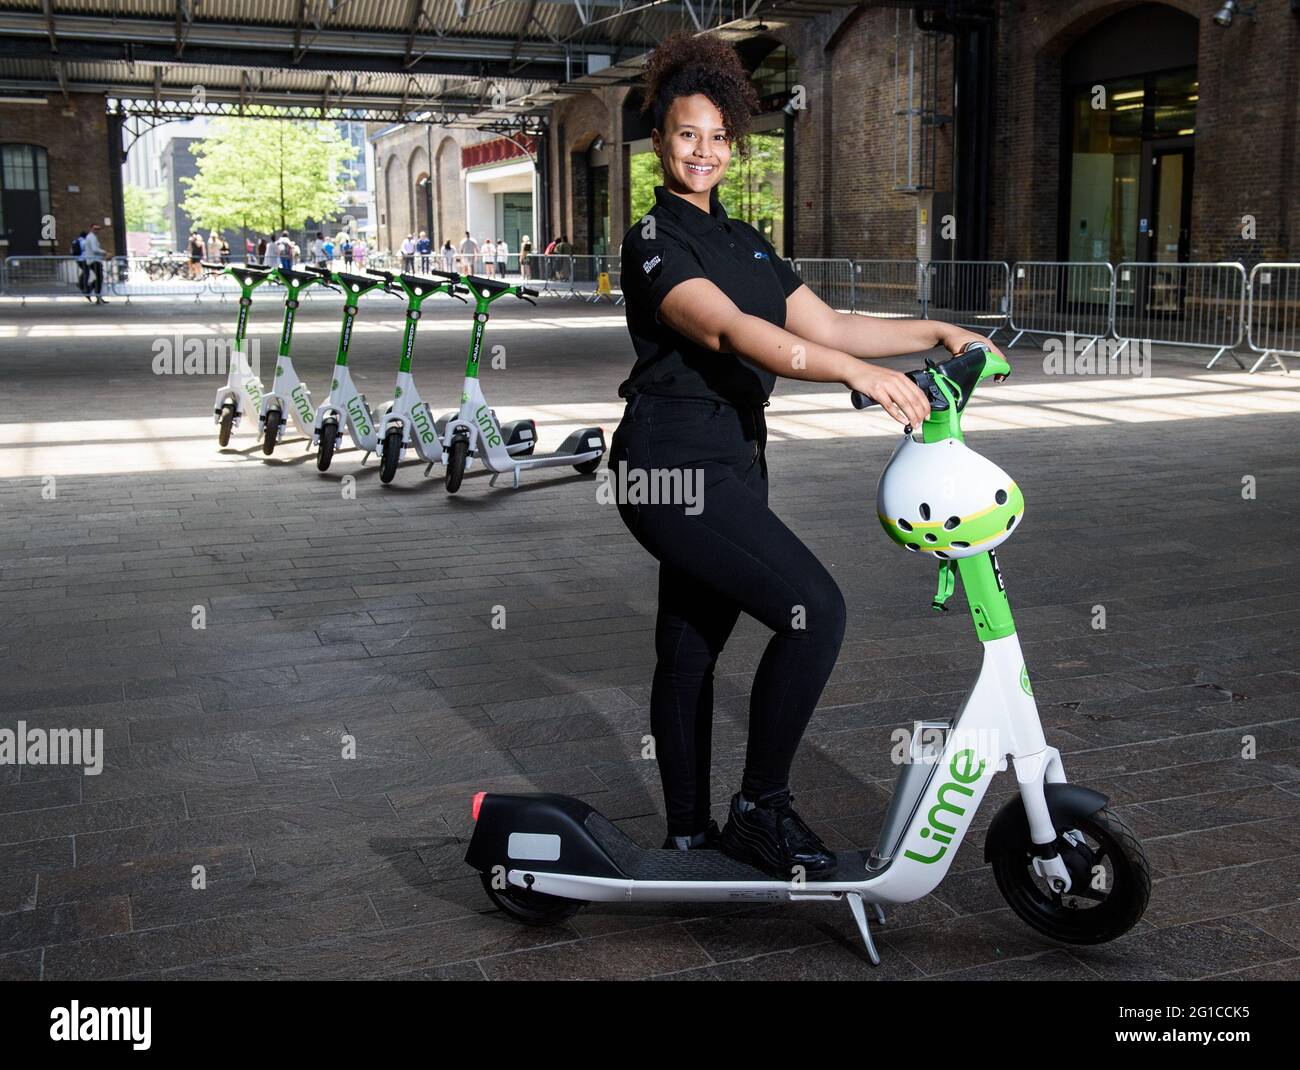 EDITORIAL USE ONLY Maria De Maio rides an electric scooter as Lime  announces a year-long trial in partnership with TfL, which will see 200 of  its latest Gen4 e-scooters available across London